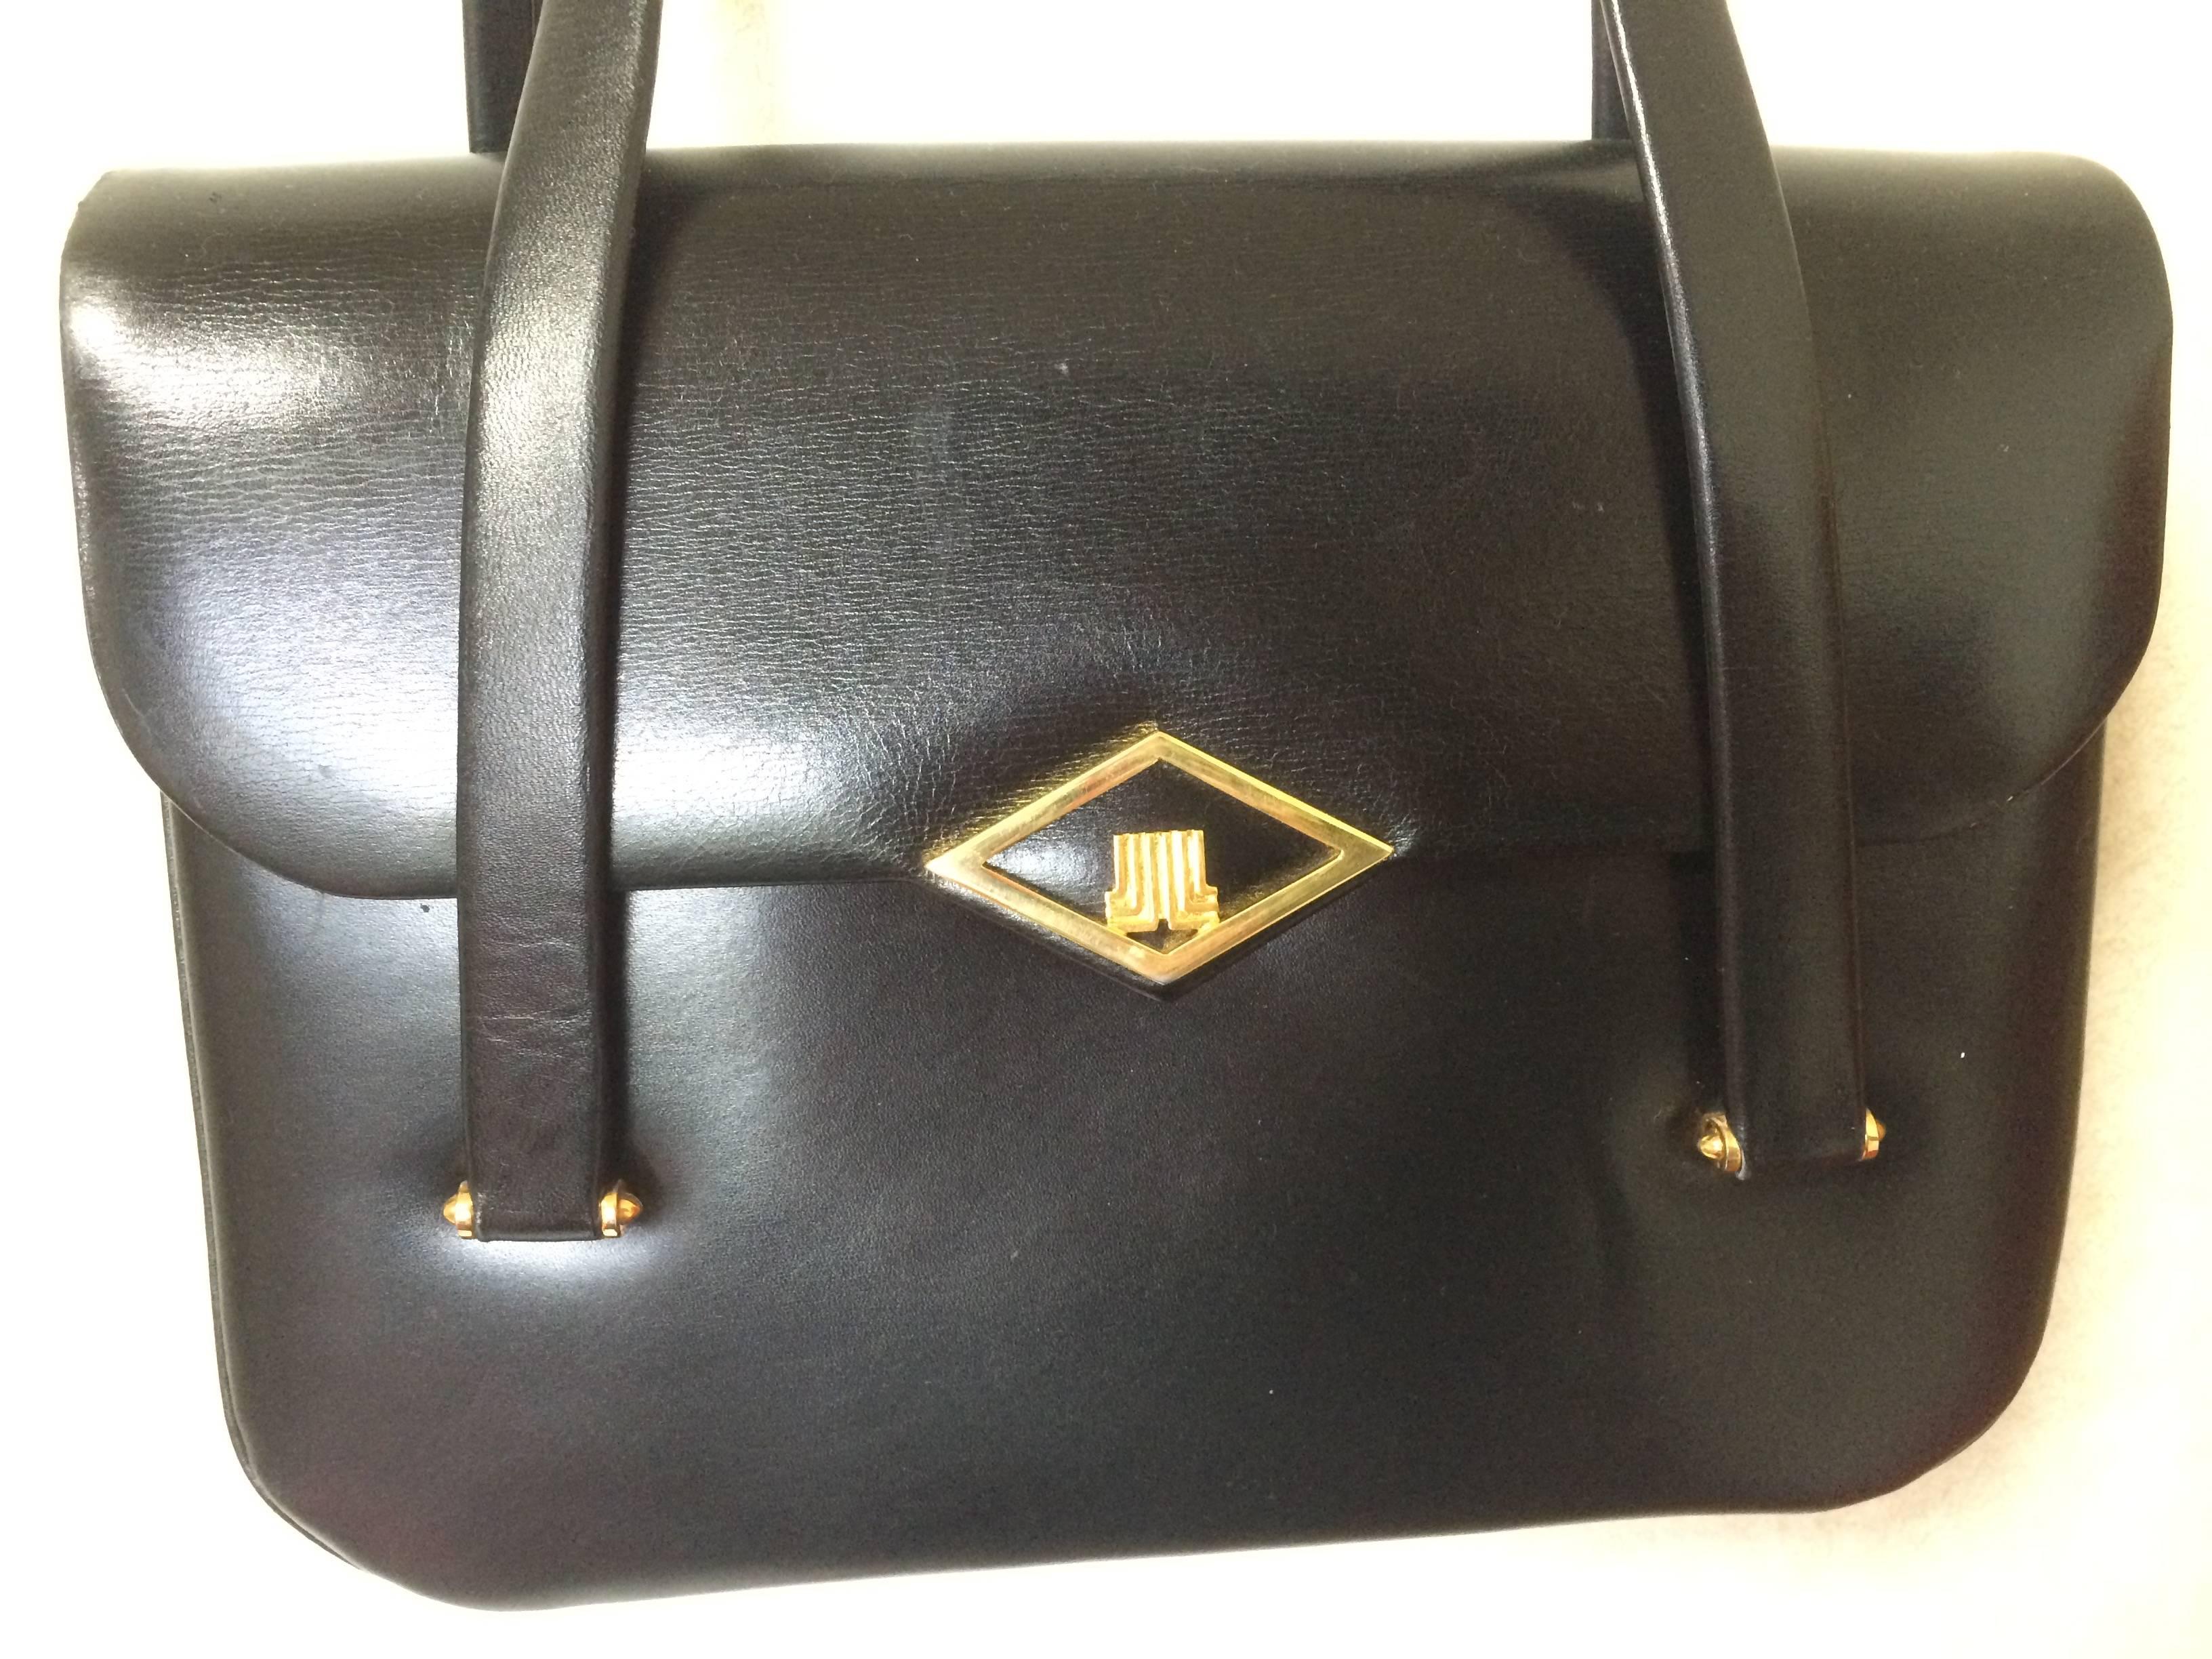 1980's Vintage LANVIN classic black leather shoulder bag, tote bag with golden logo motif.

Introducing a vintage LANVIN classic black leather purse that would suit for any occasions. 
The golden logo hardware is at the front flap.
Overall,